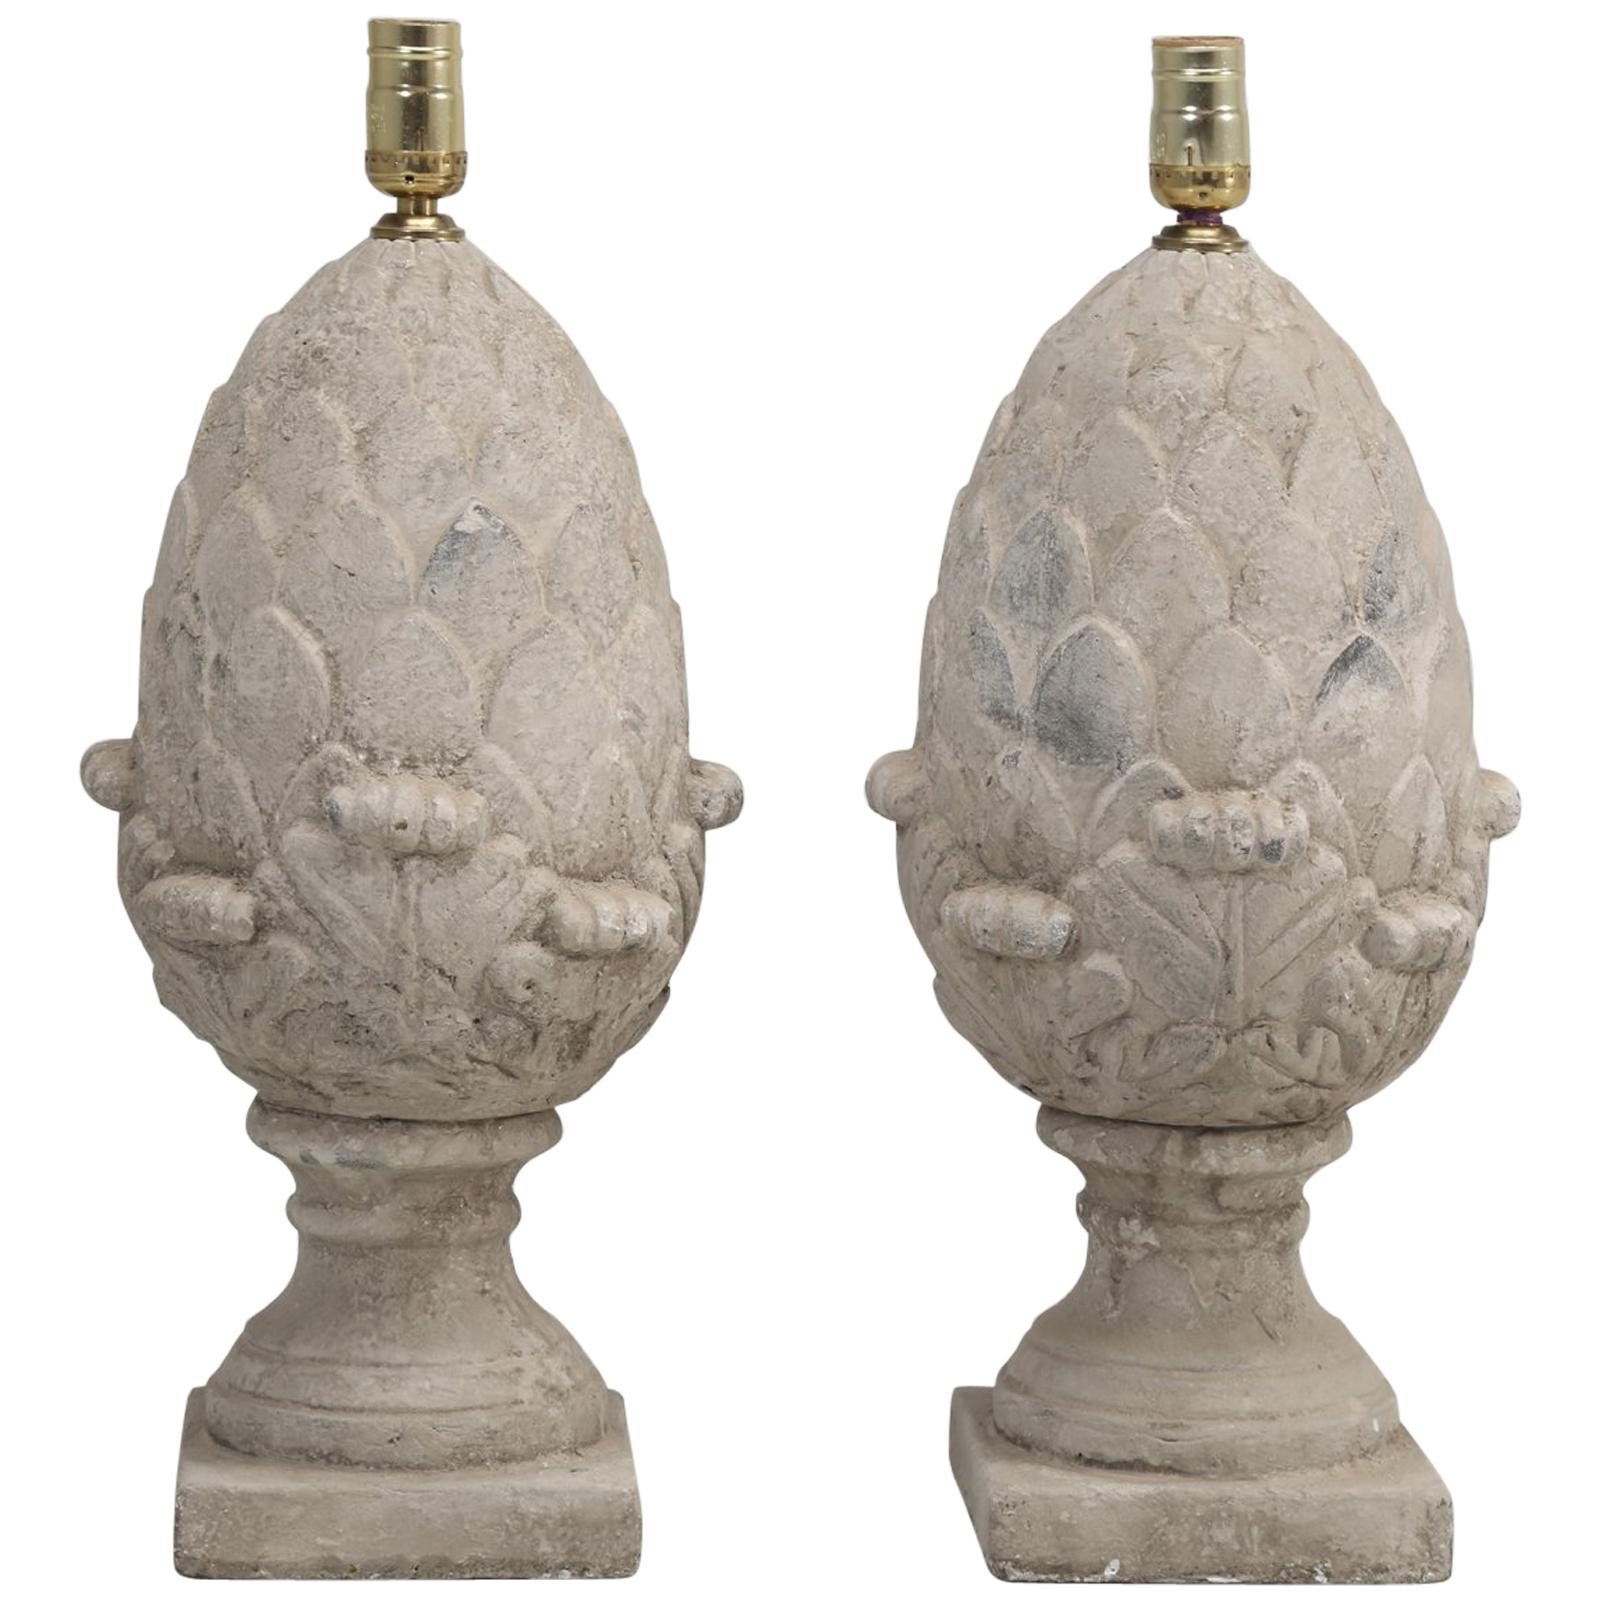 Pair of Faux Stone Lamps in the Form of an Artichoke